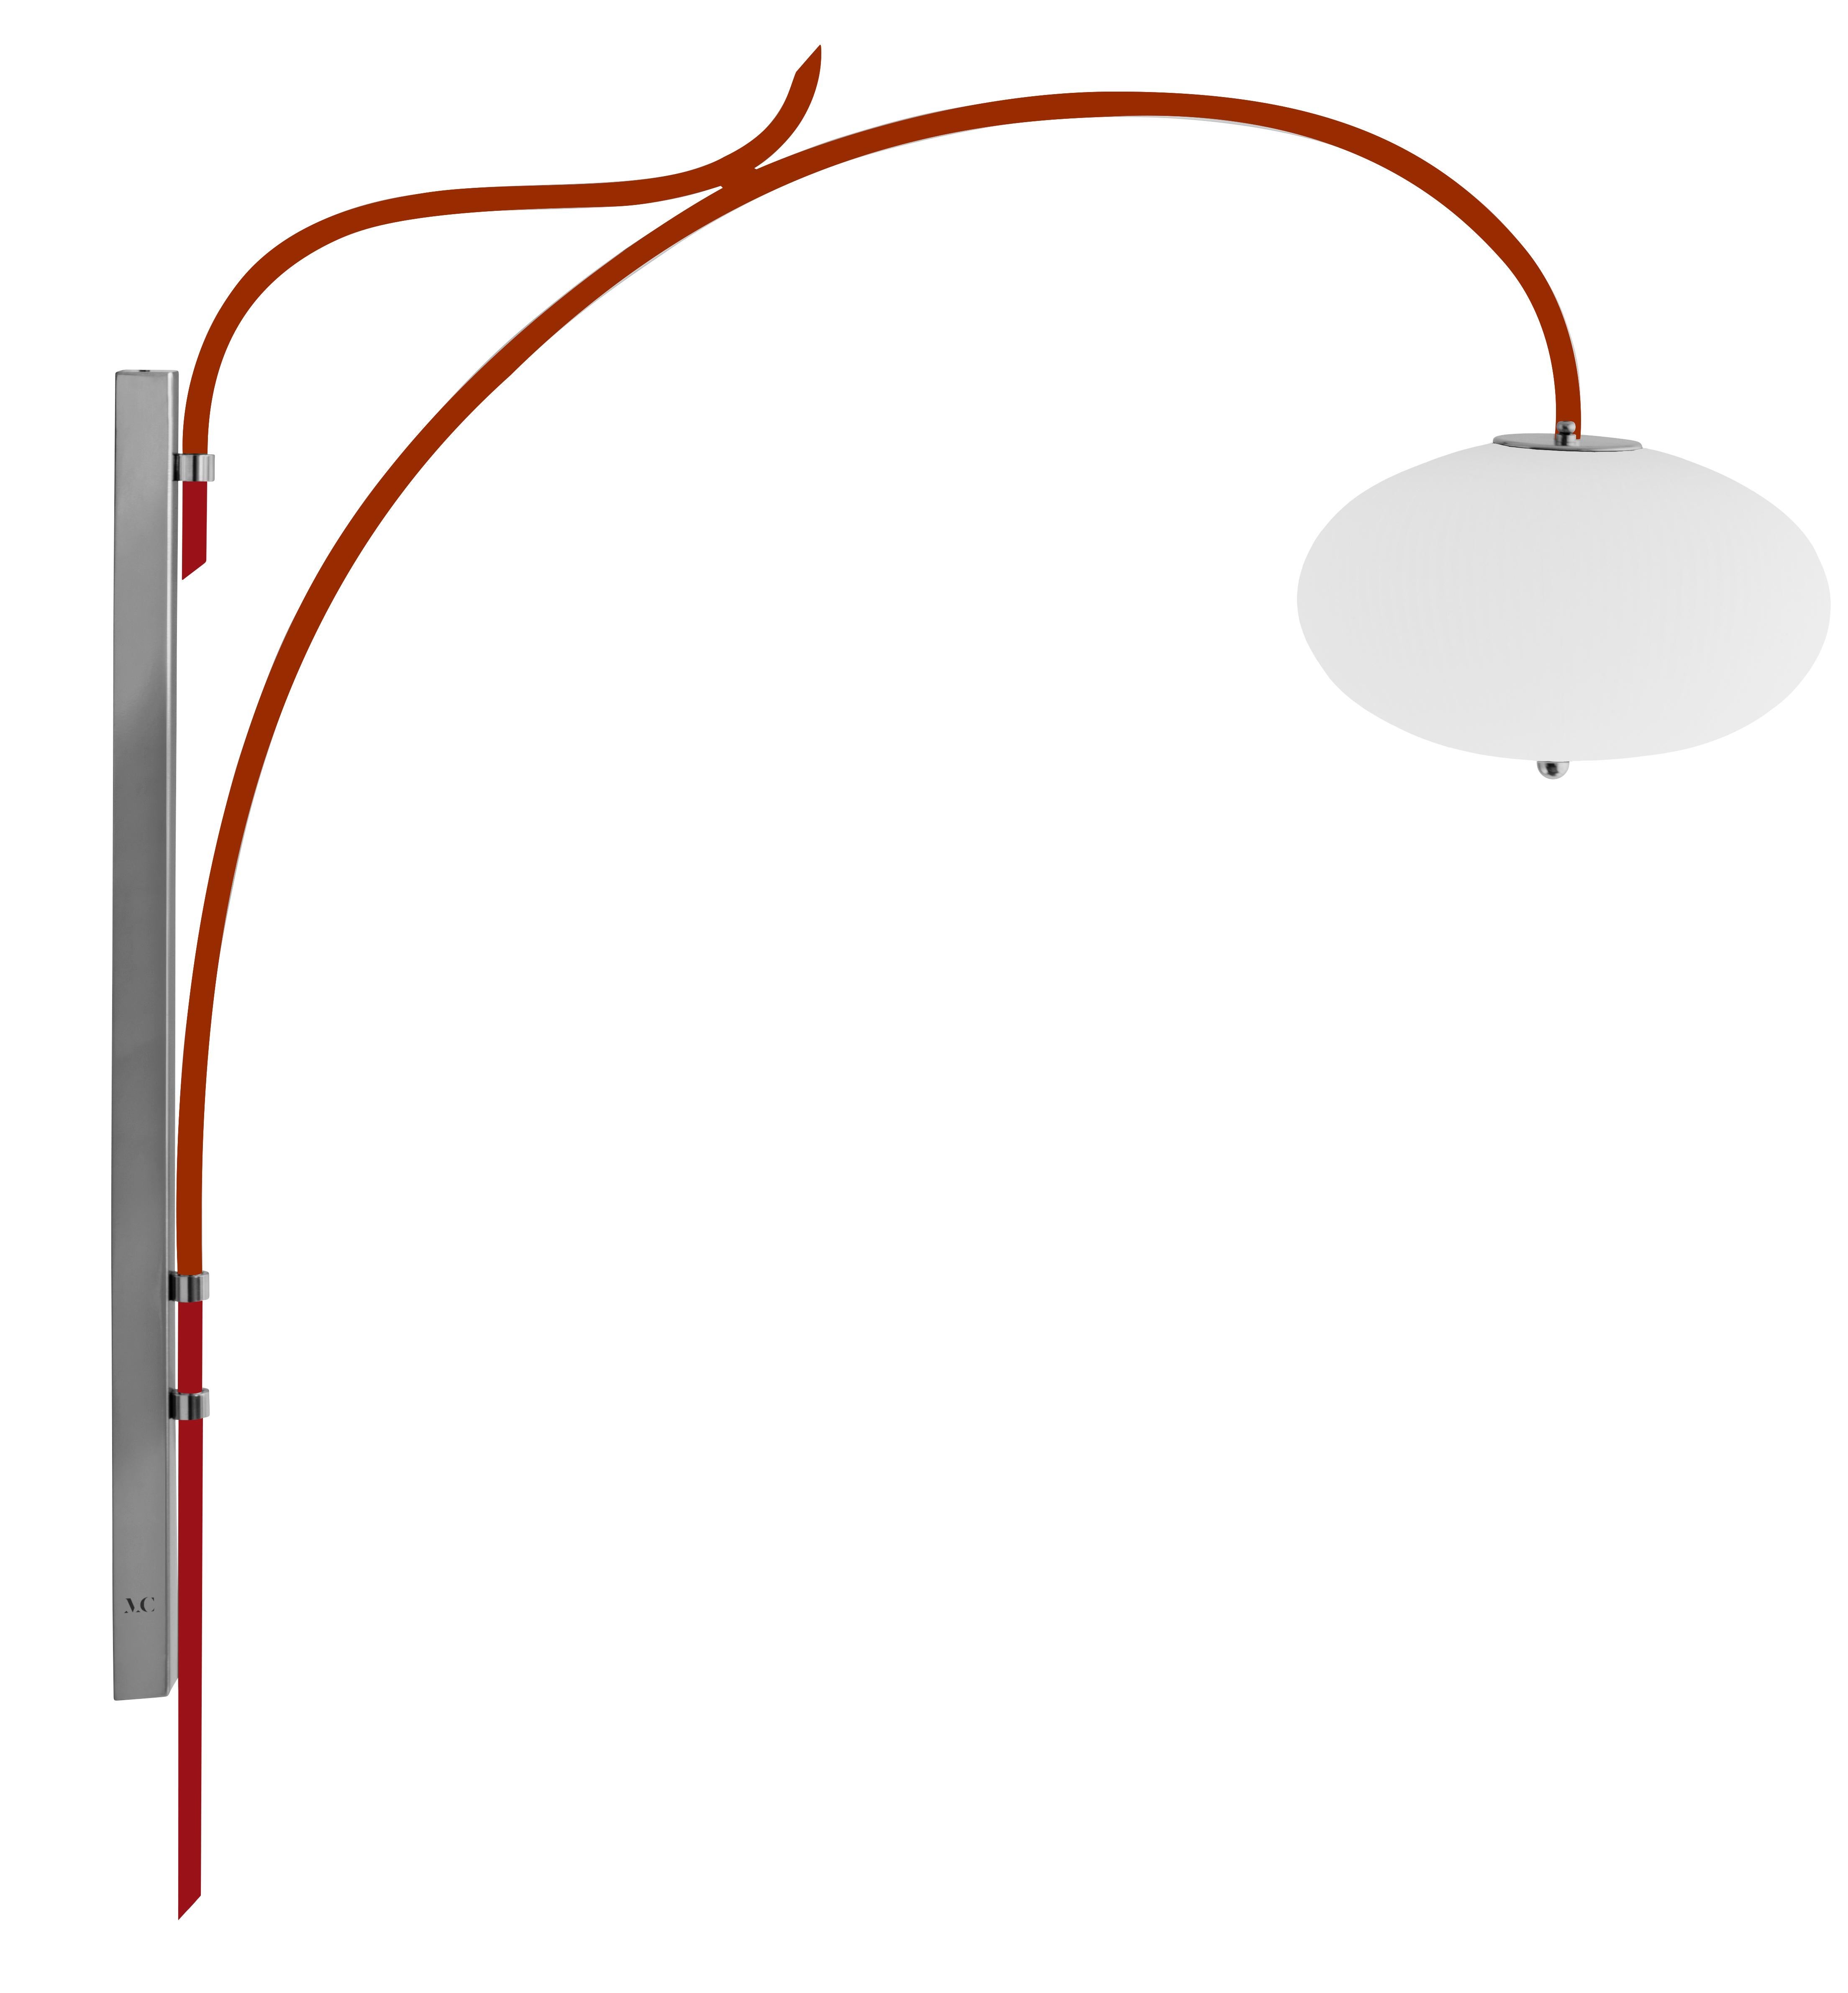 Wall Lamp China 07 by Magic Circus Editions.
Dimensions: H 120 x W 32 x D 113.5 cm.
Materials: brass, mouth blown glass sculpted with a diamond saw.
Colour: enamel soft white, red brick.

Available finishes: brass, nickel.
Available colours: